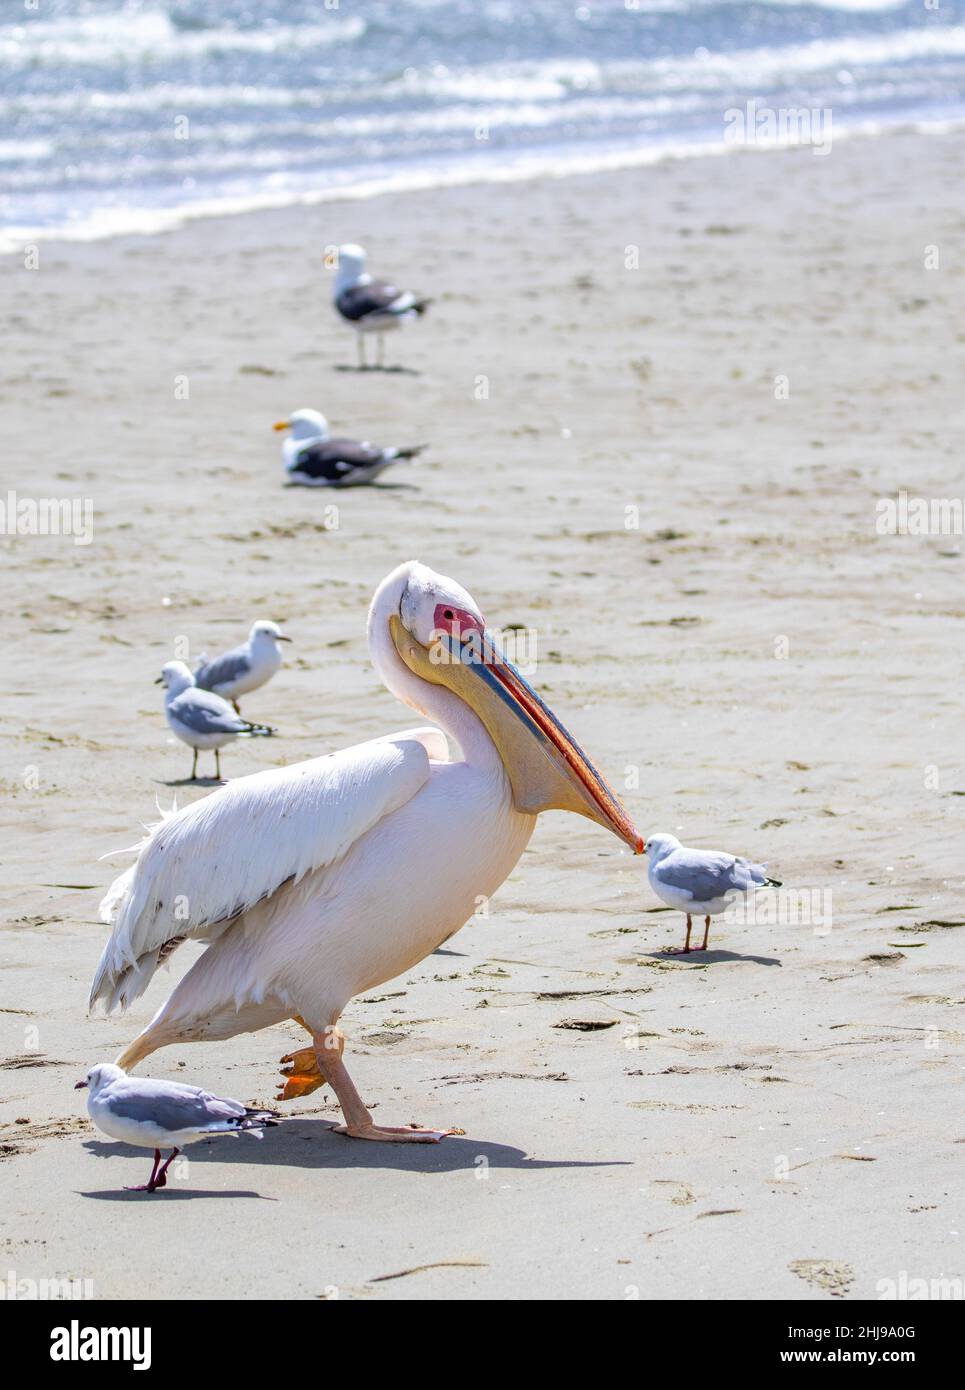 Grand Pelican blanc, Walvis Bay, Namibie Banque D'Images